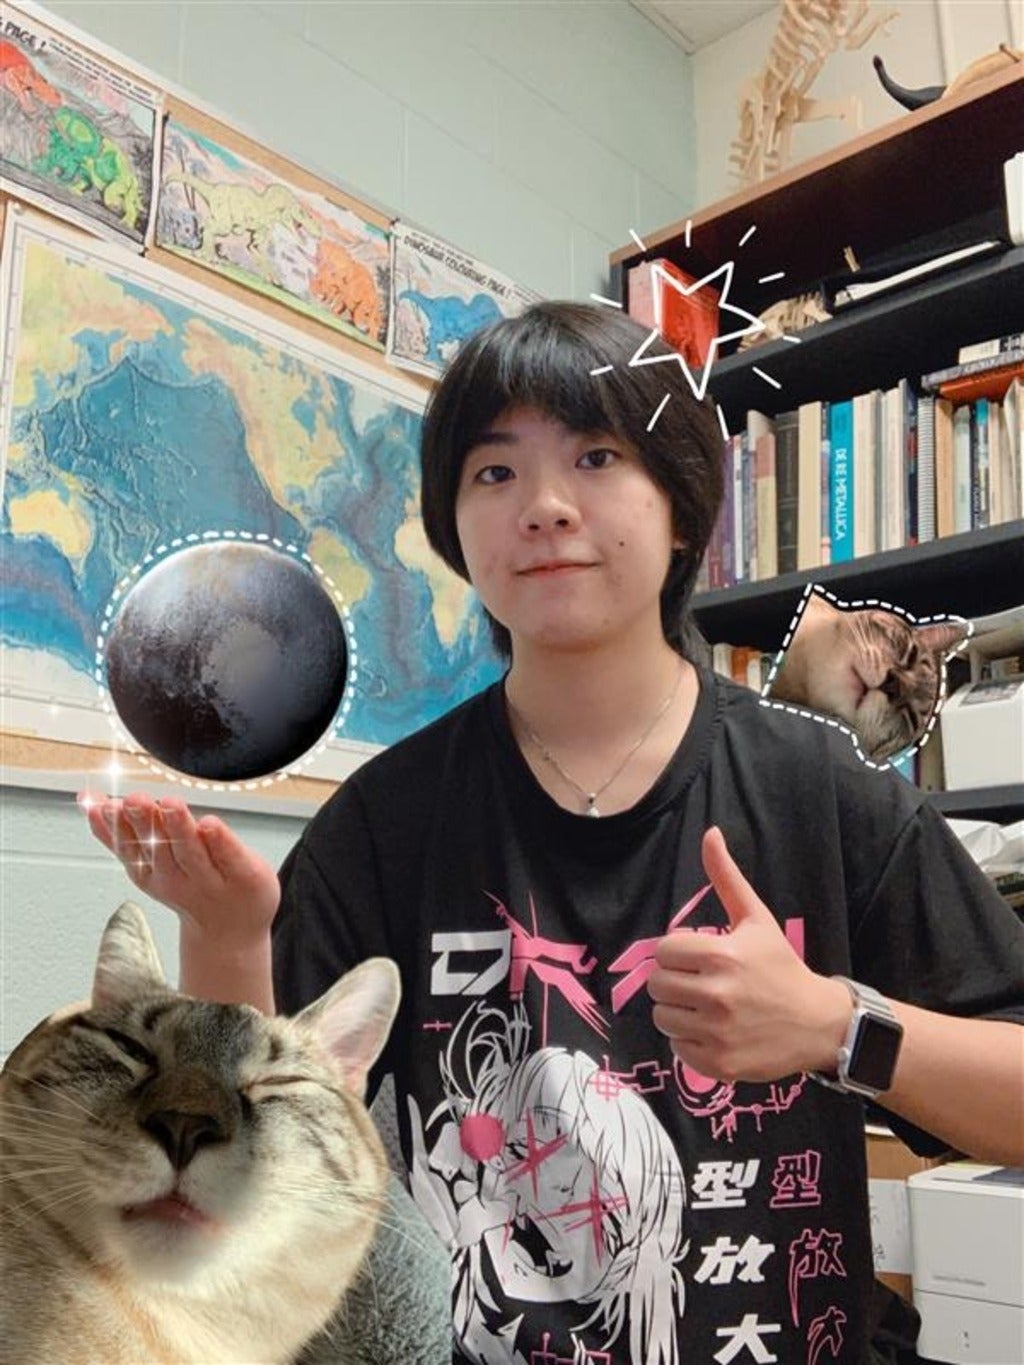 Pluto Jiang with cat and planet